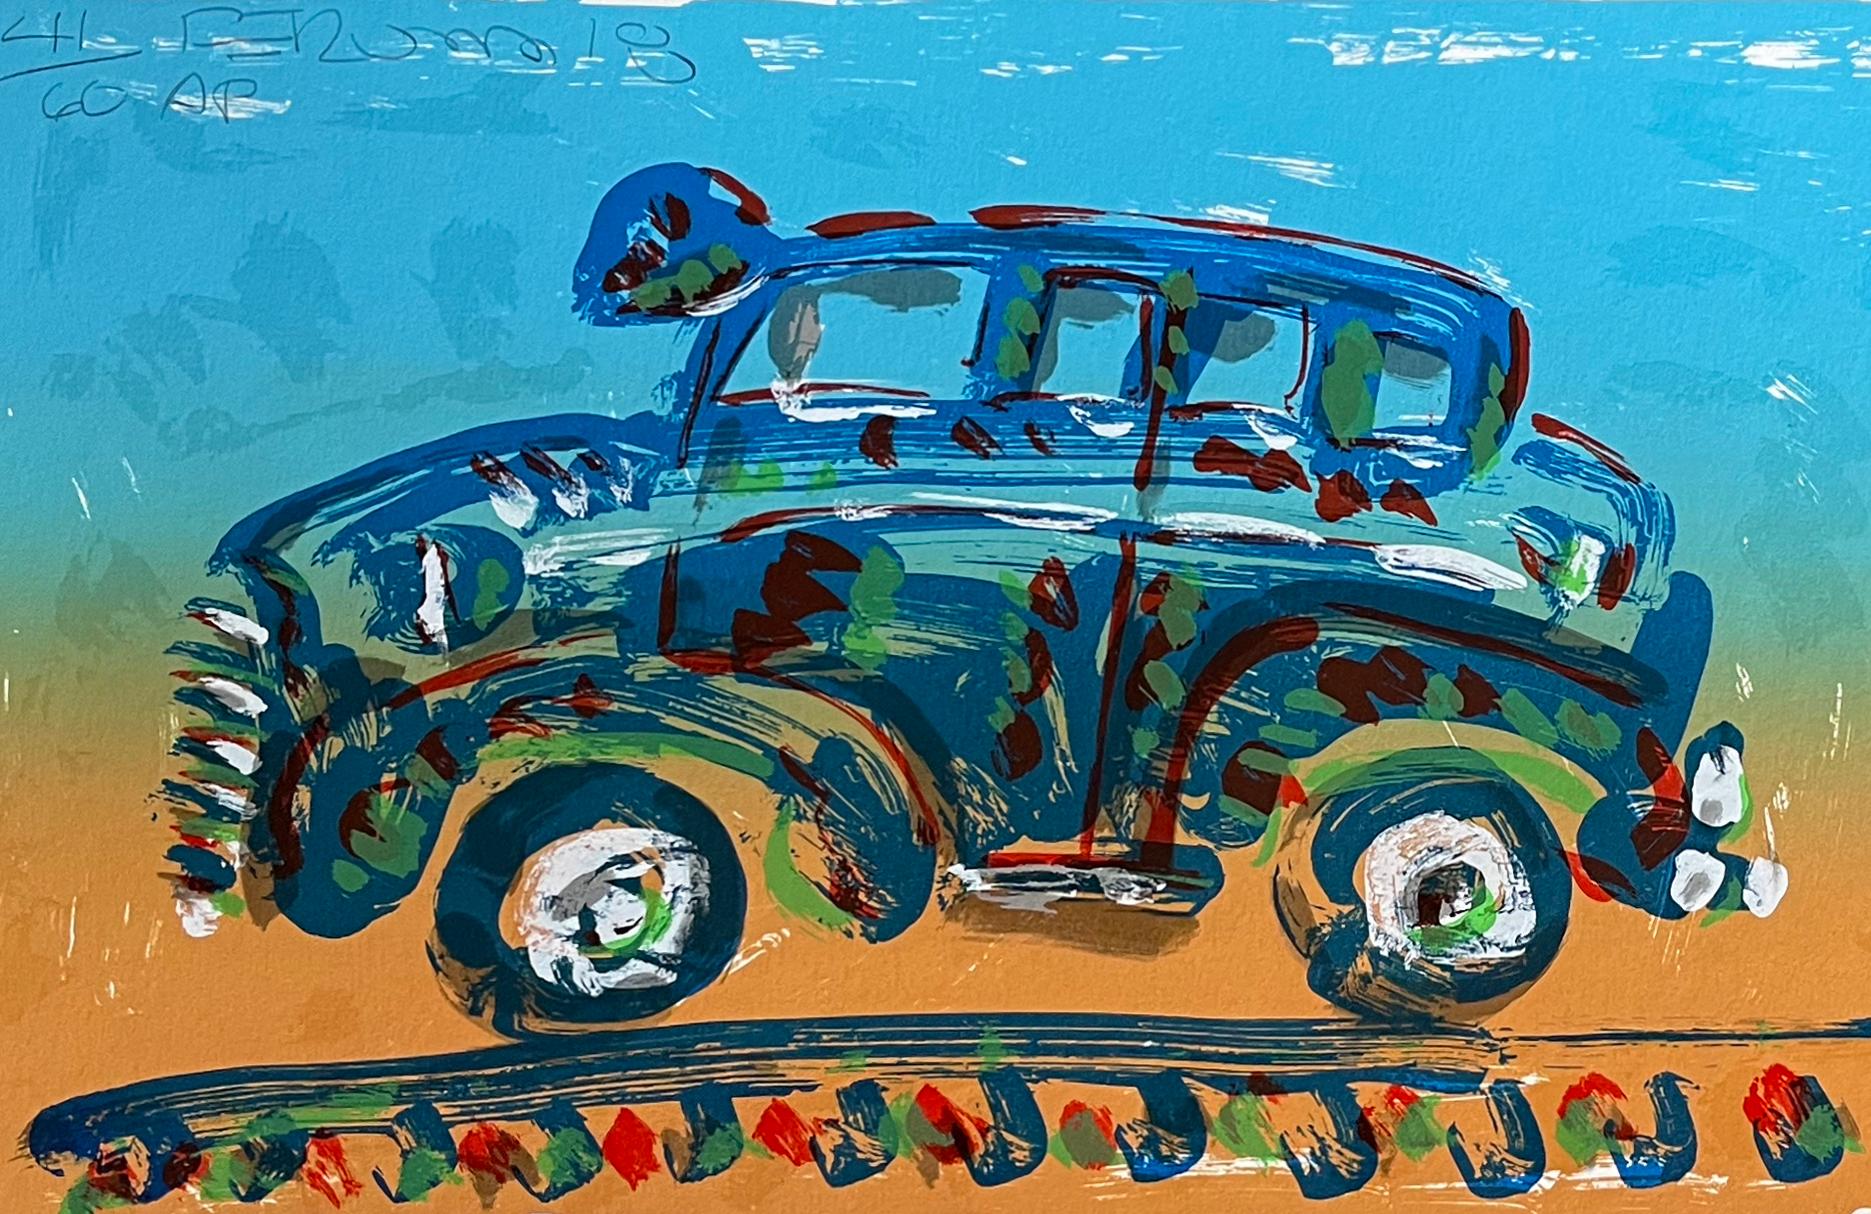 Car and trailer - Contemporary Print by Frank Romero